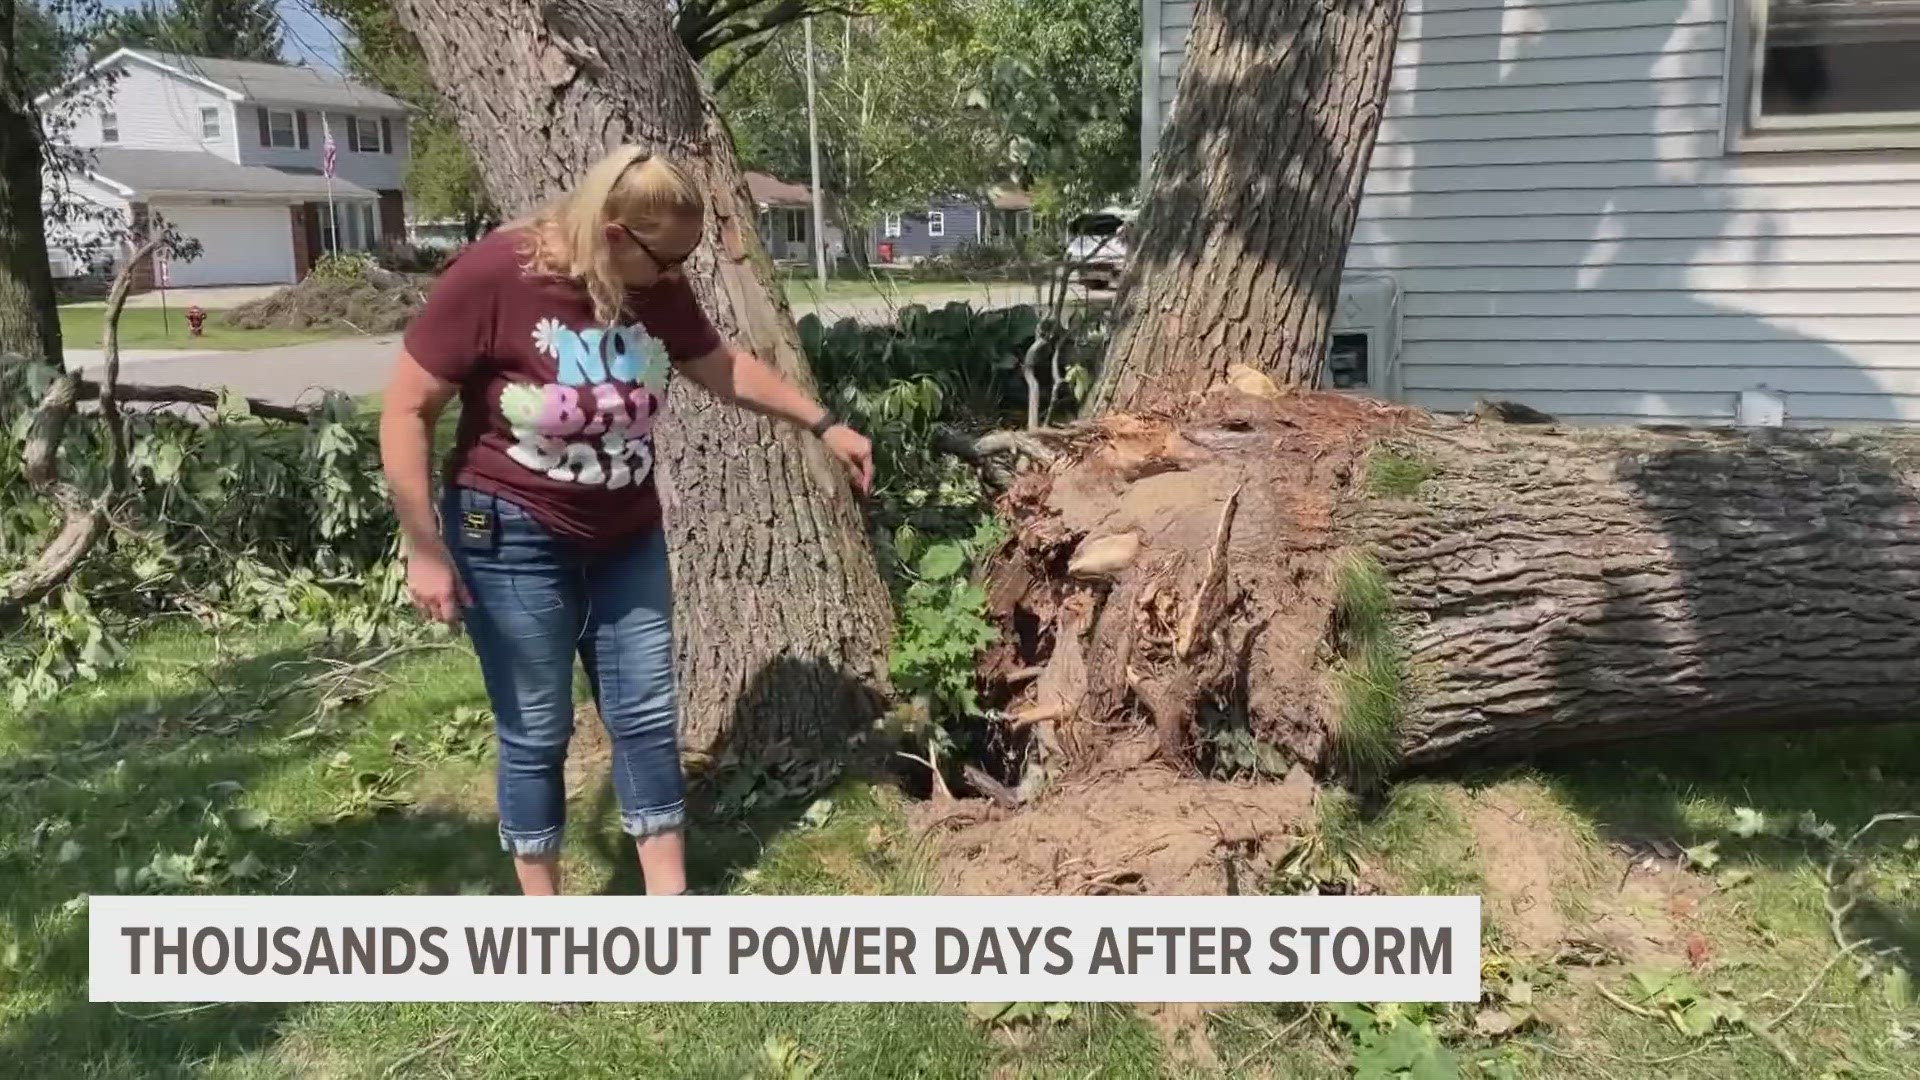 More than 20,000 Consumers Energy customers are still without power after seven tornados touched down in Michigan last Thursday.